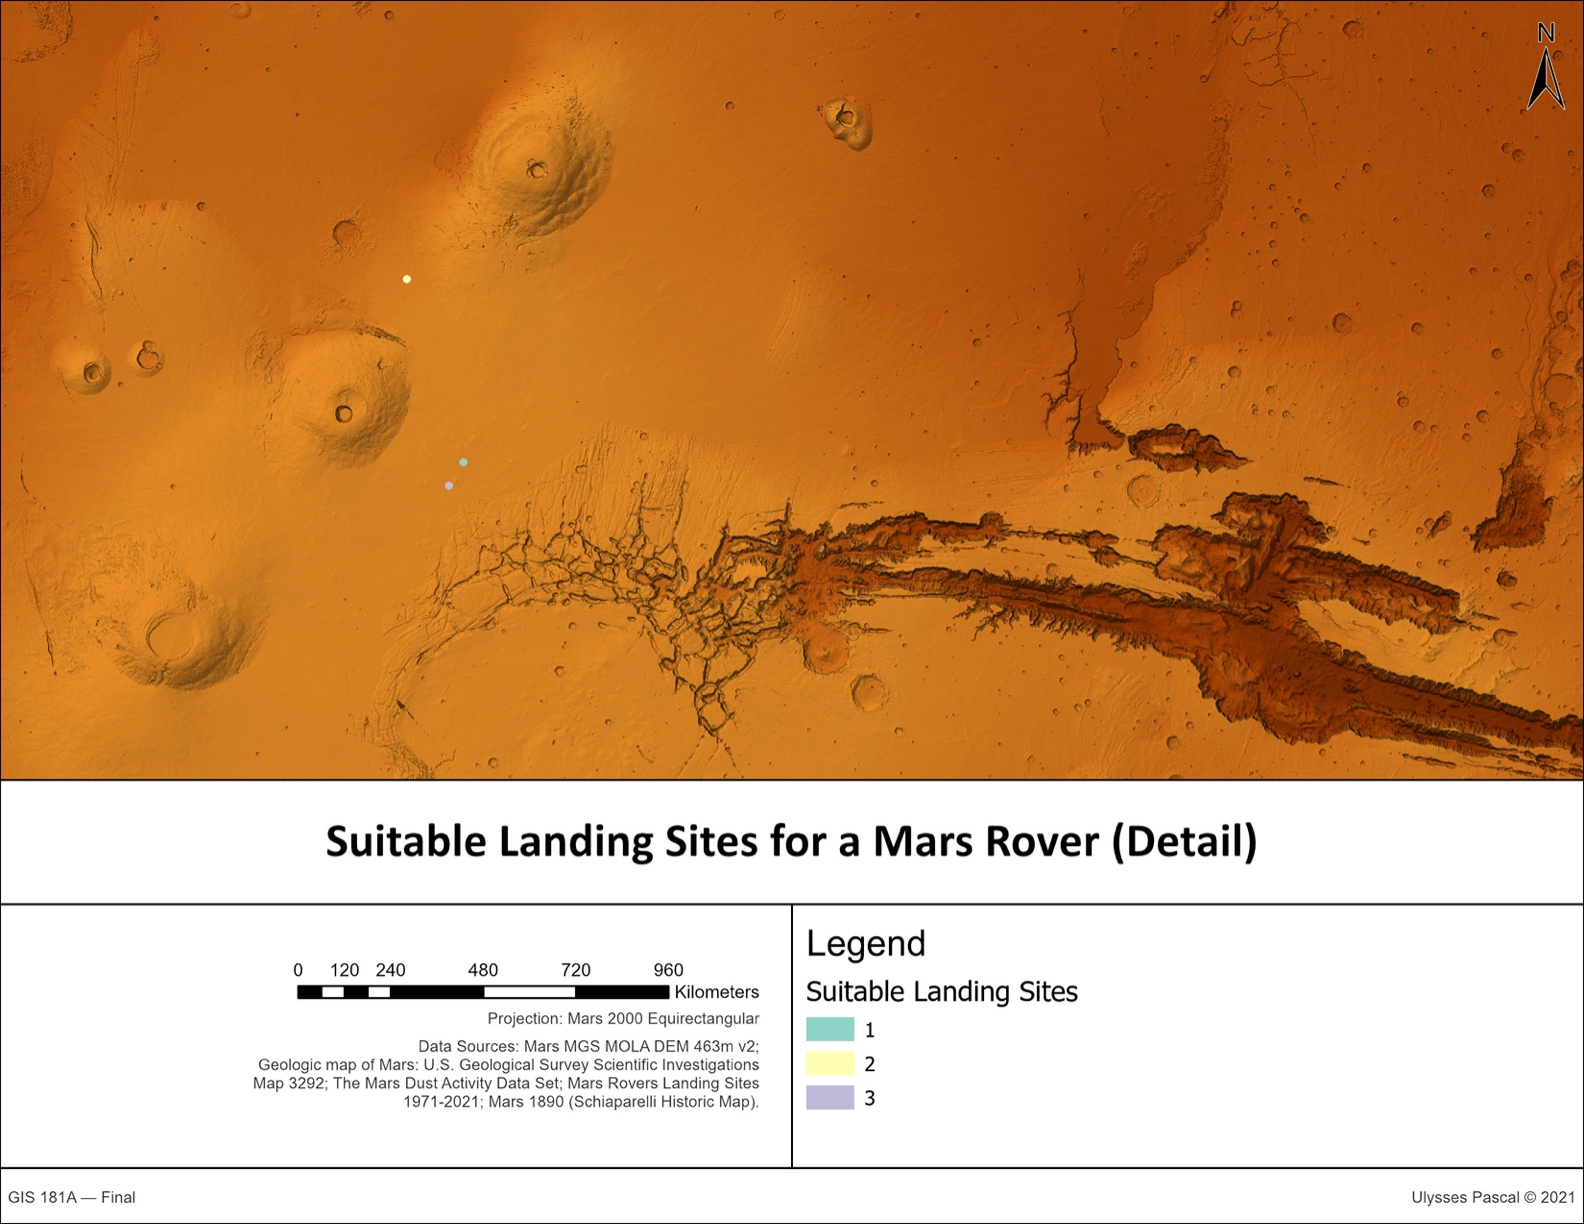 Suitable Landing Sites for a Mars Rover